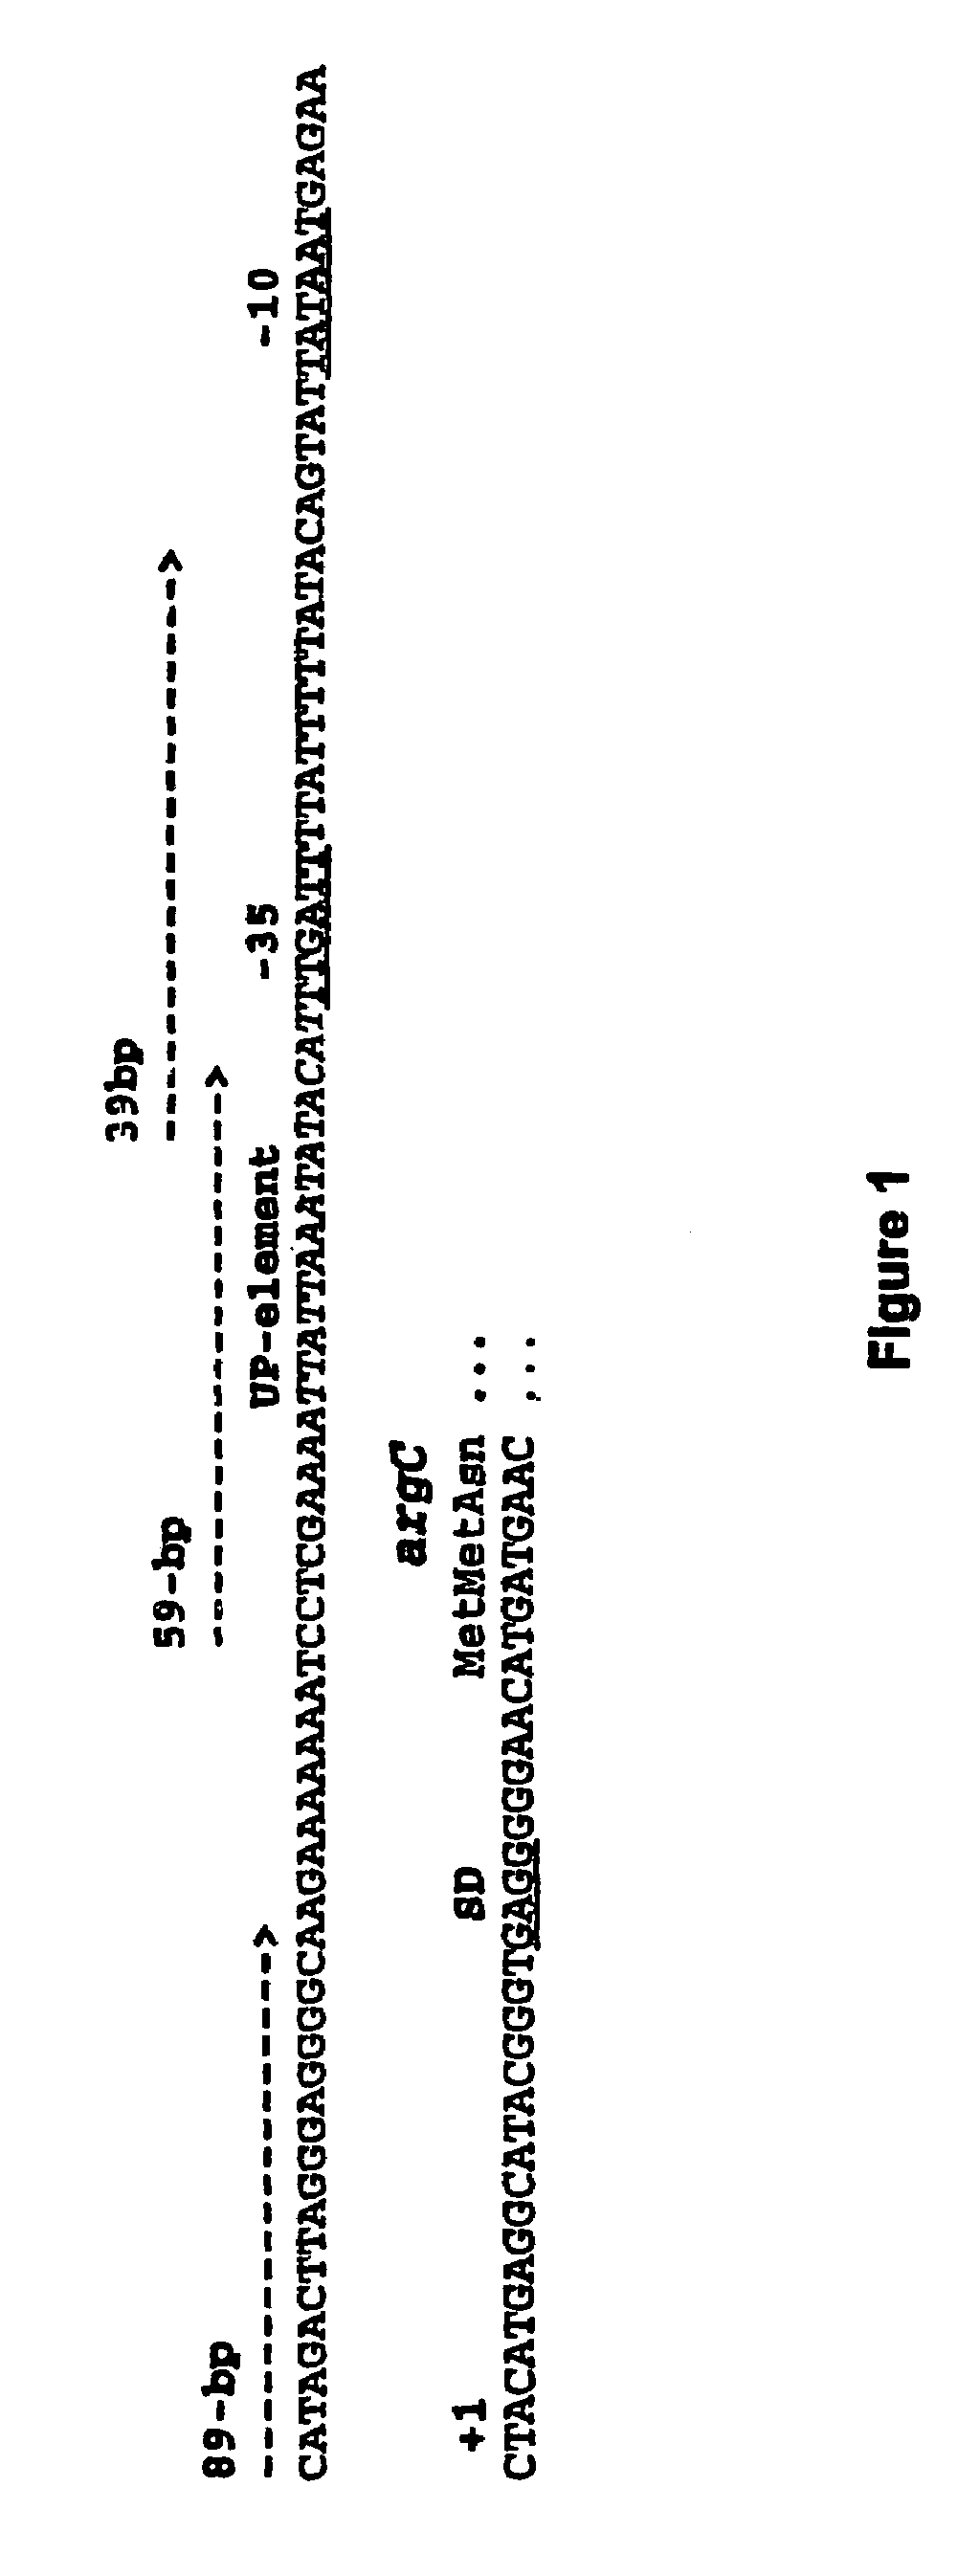 Methods of RNA and protein synthesis